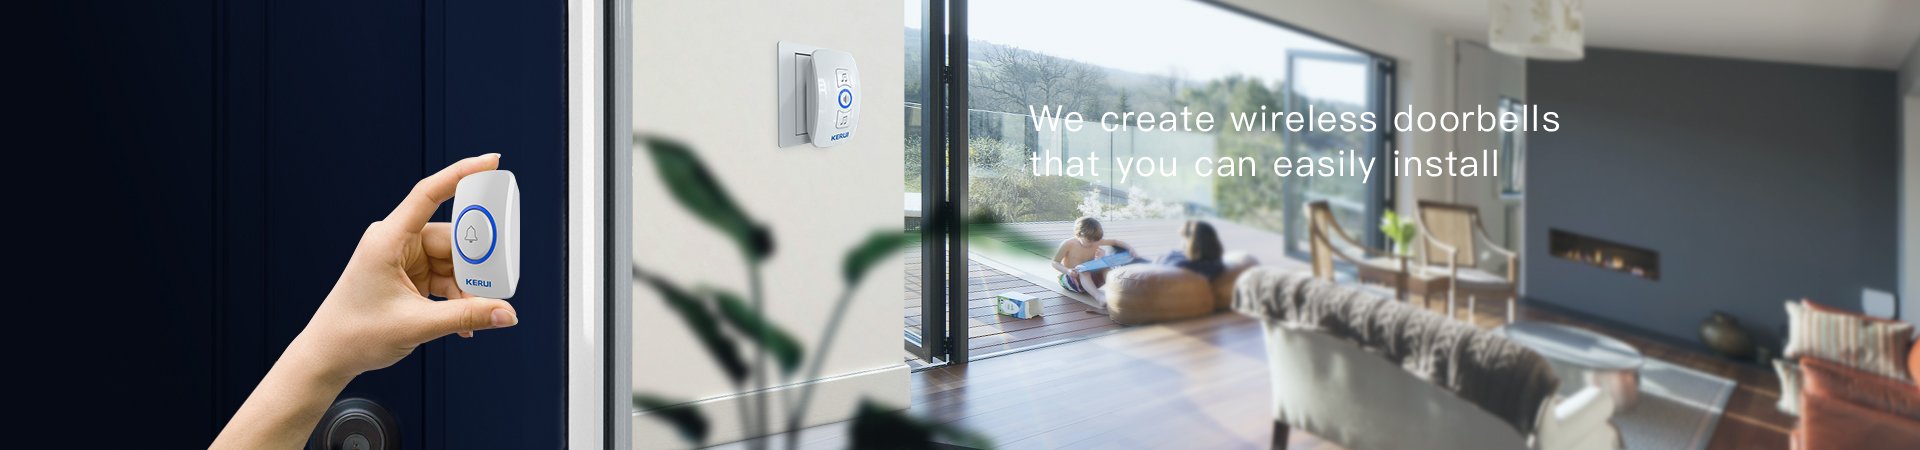 We create wireless doorbells that you can easily install